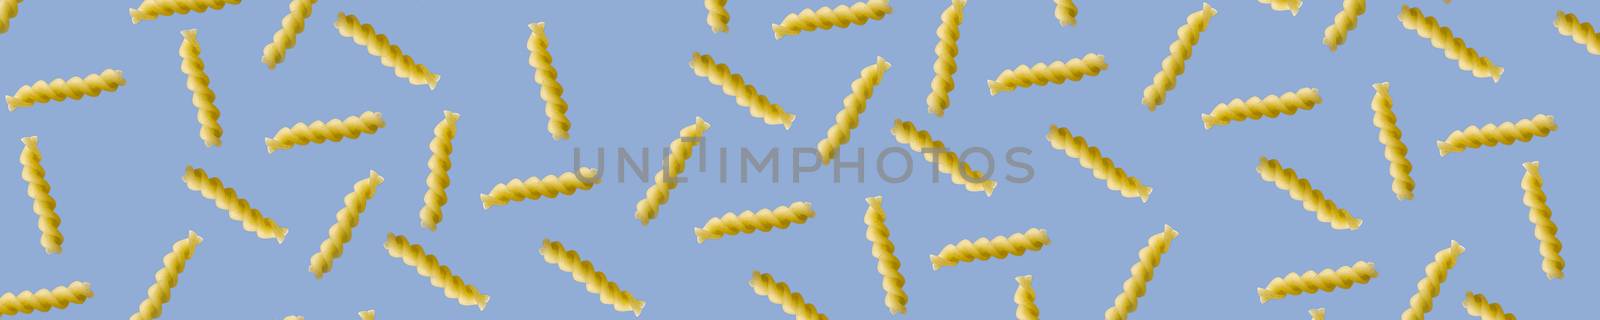 Fusilli pasta random flat lay on blue background without shadow. can be used as raw pasta background, poster, banner not pattern. by PhotoTime